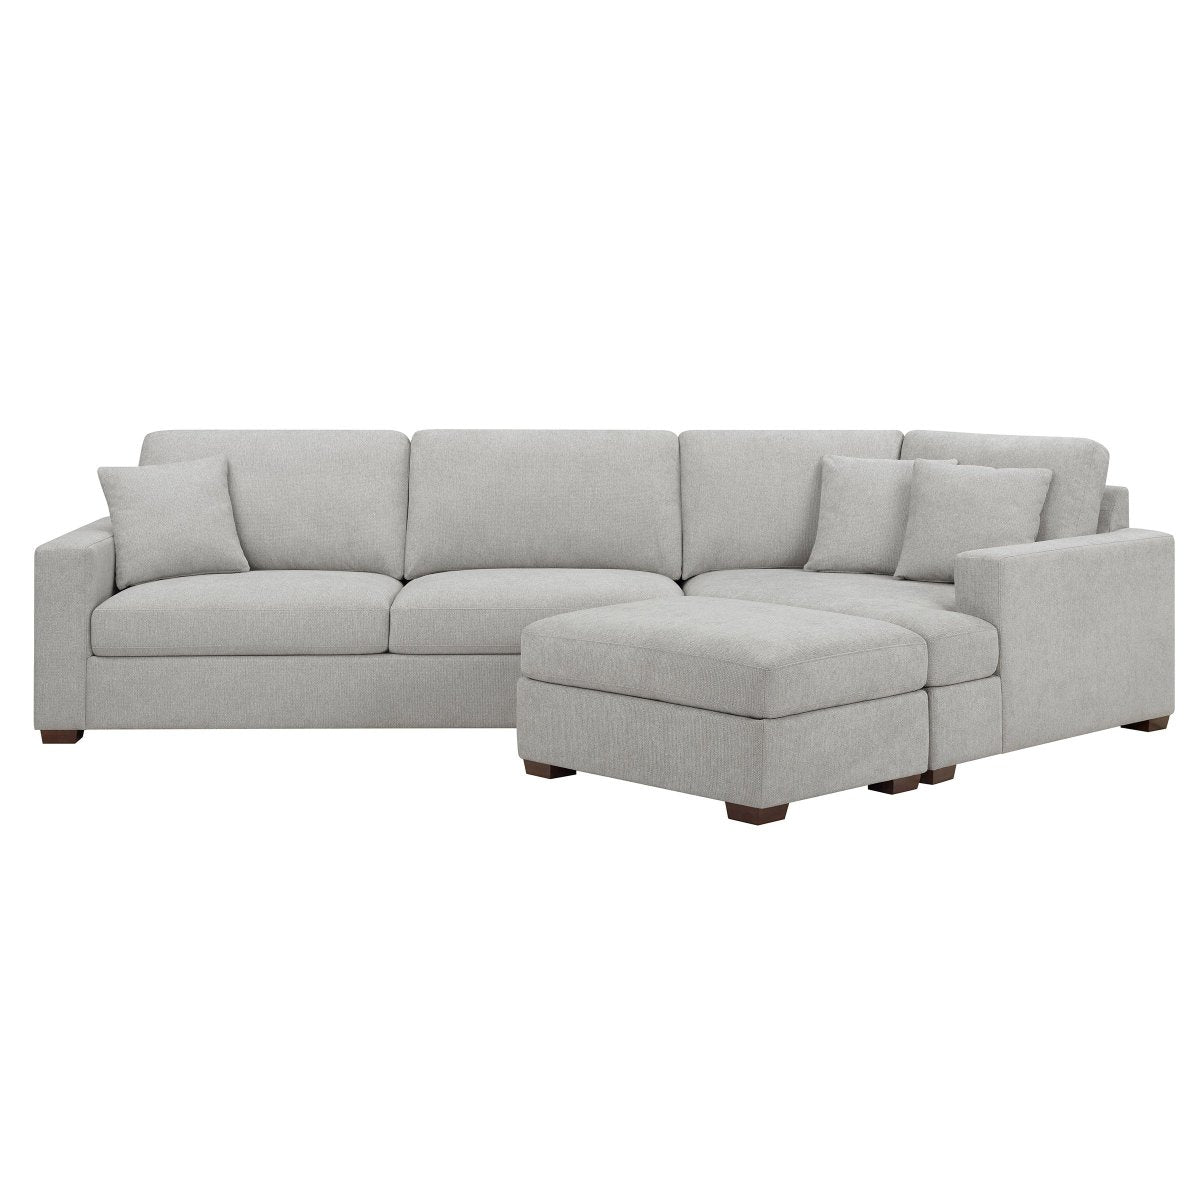 Thomasville Ezra Fabric Sectional with Ottoman - Alpine Outlets